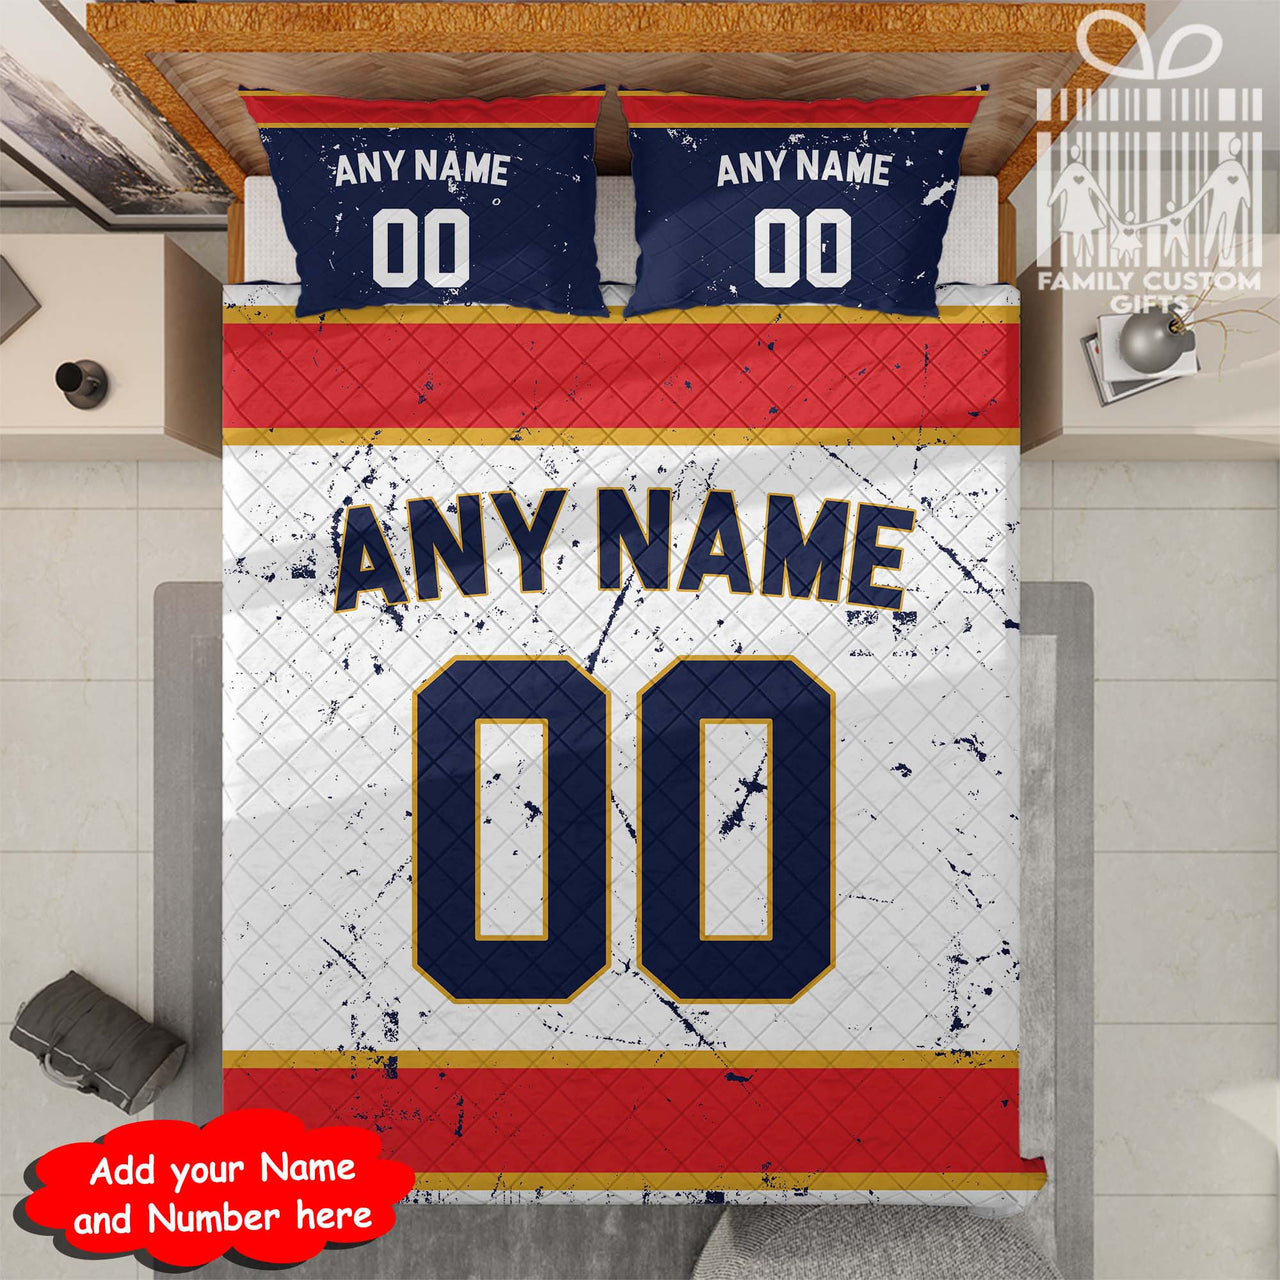 Custom Quilt Sets Florida Jersey Personalized Ice hockey Premium Quilt Bedding for Men Women